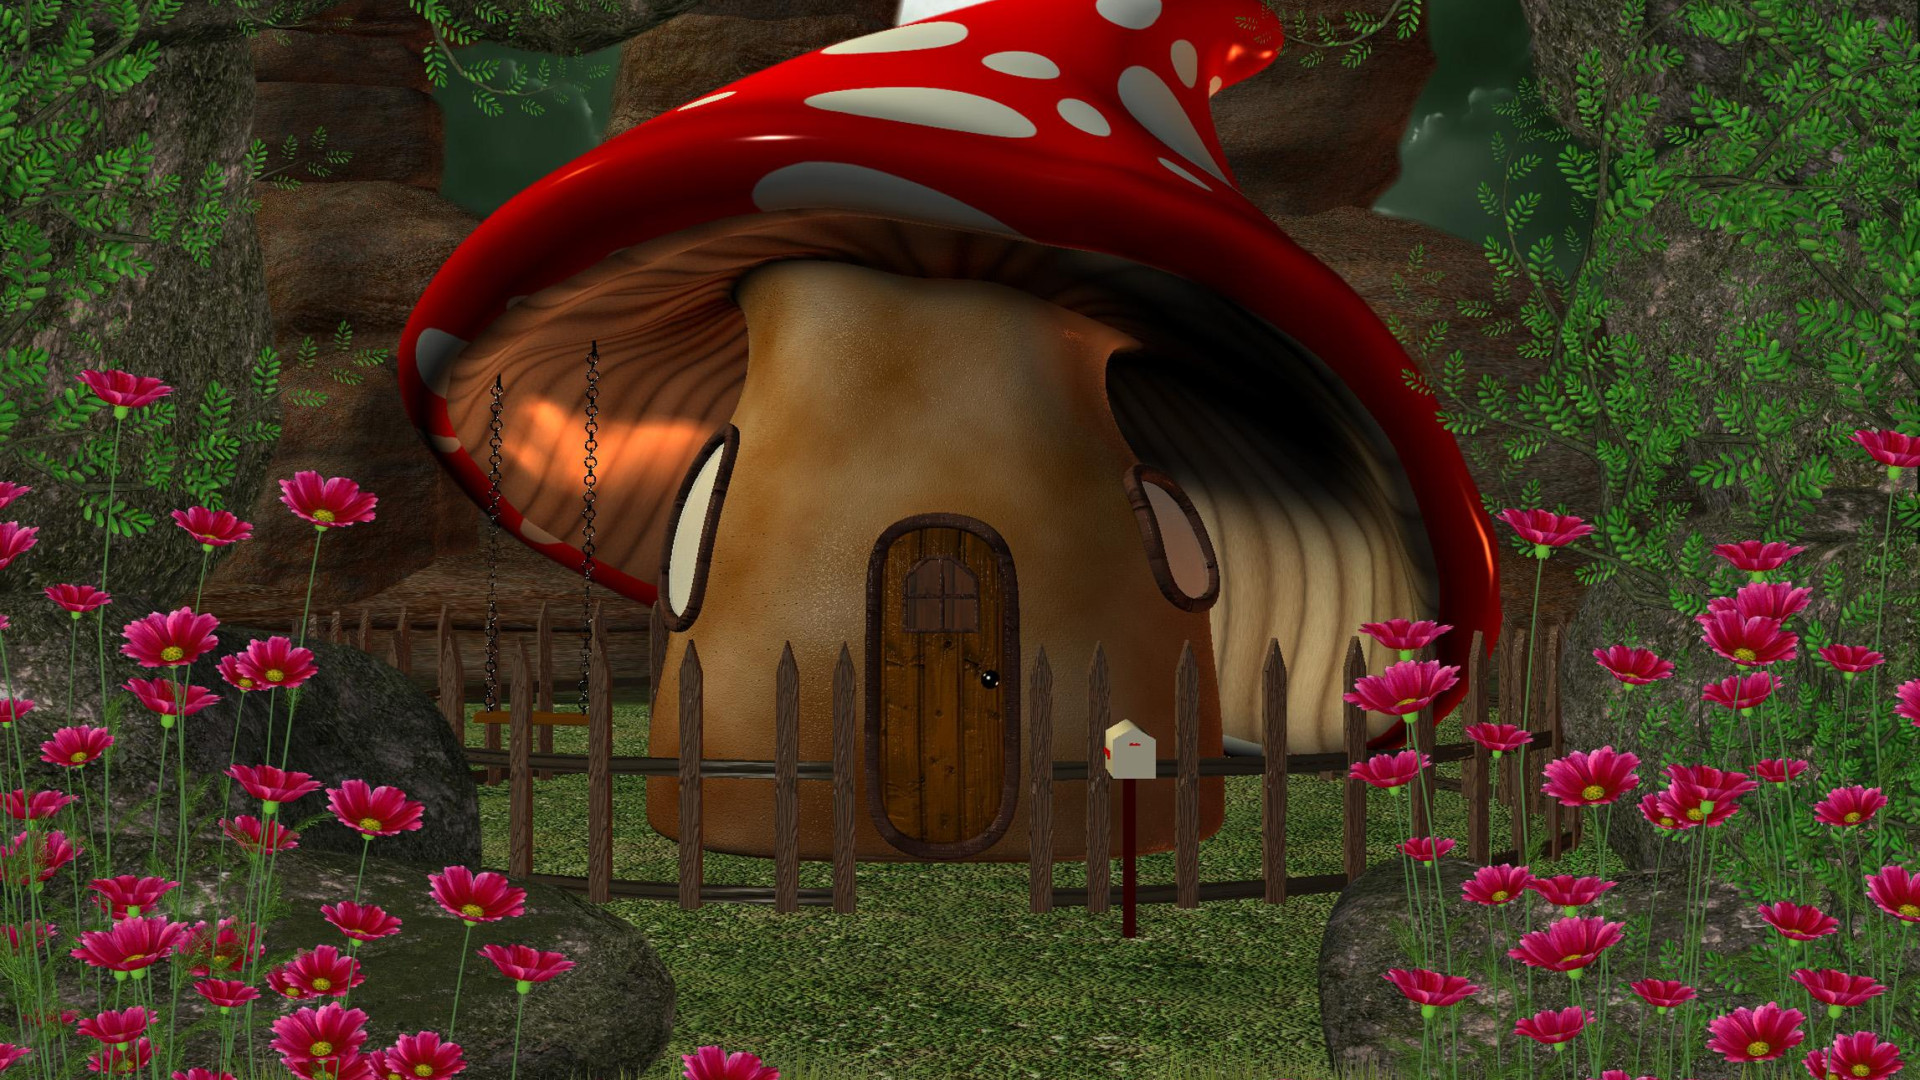 Mushroom House In The Forest HD Wallpaper Background Image